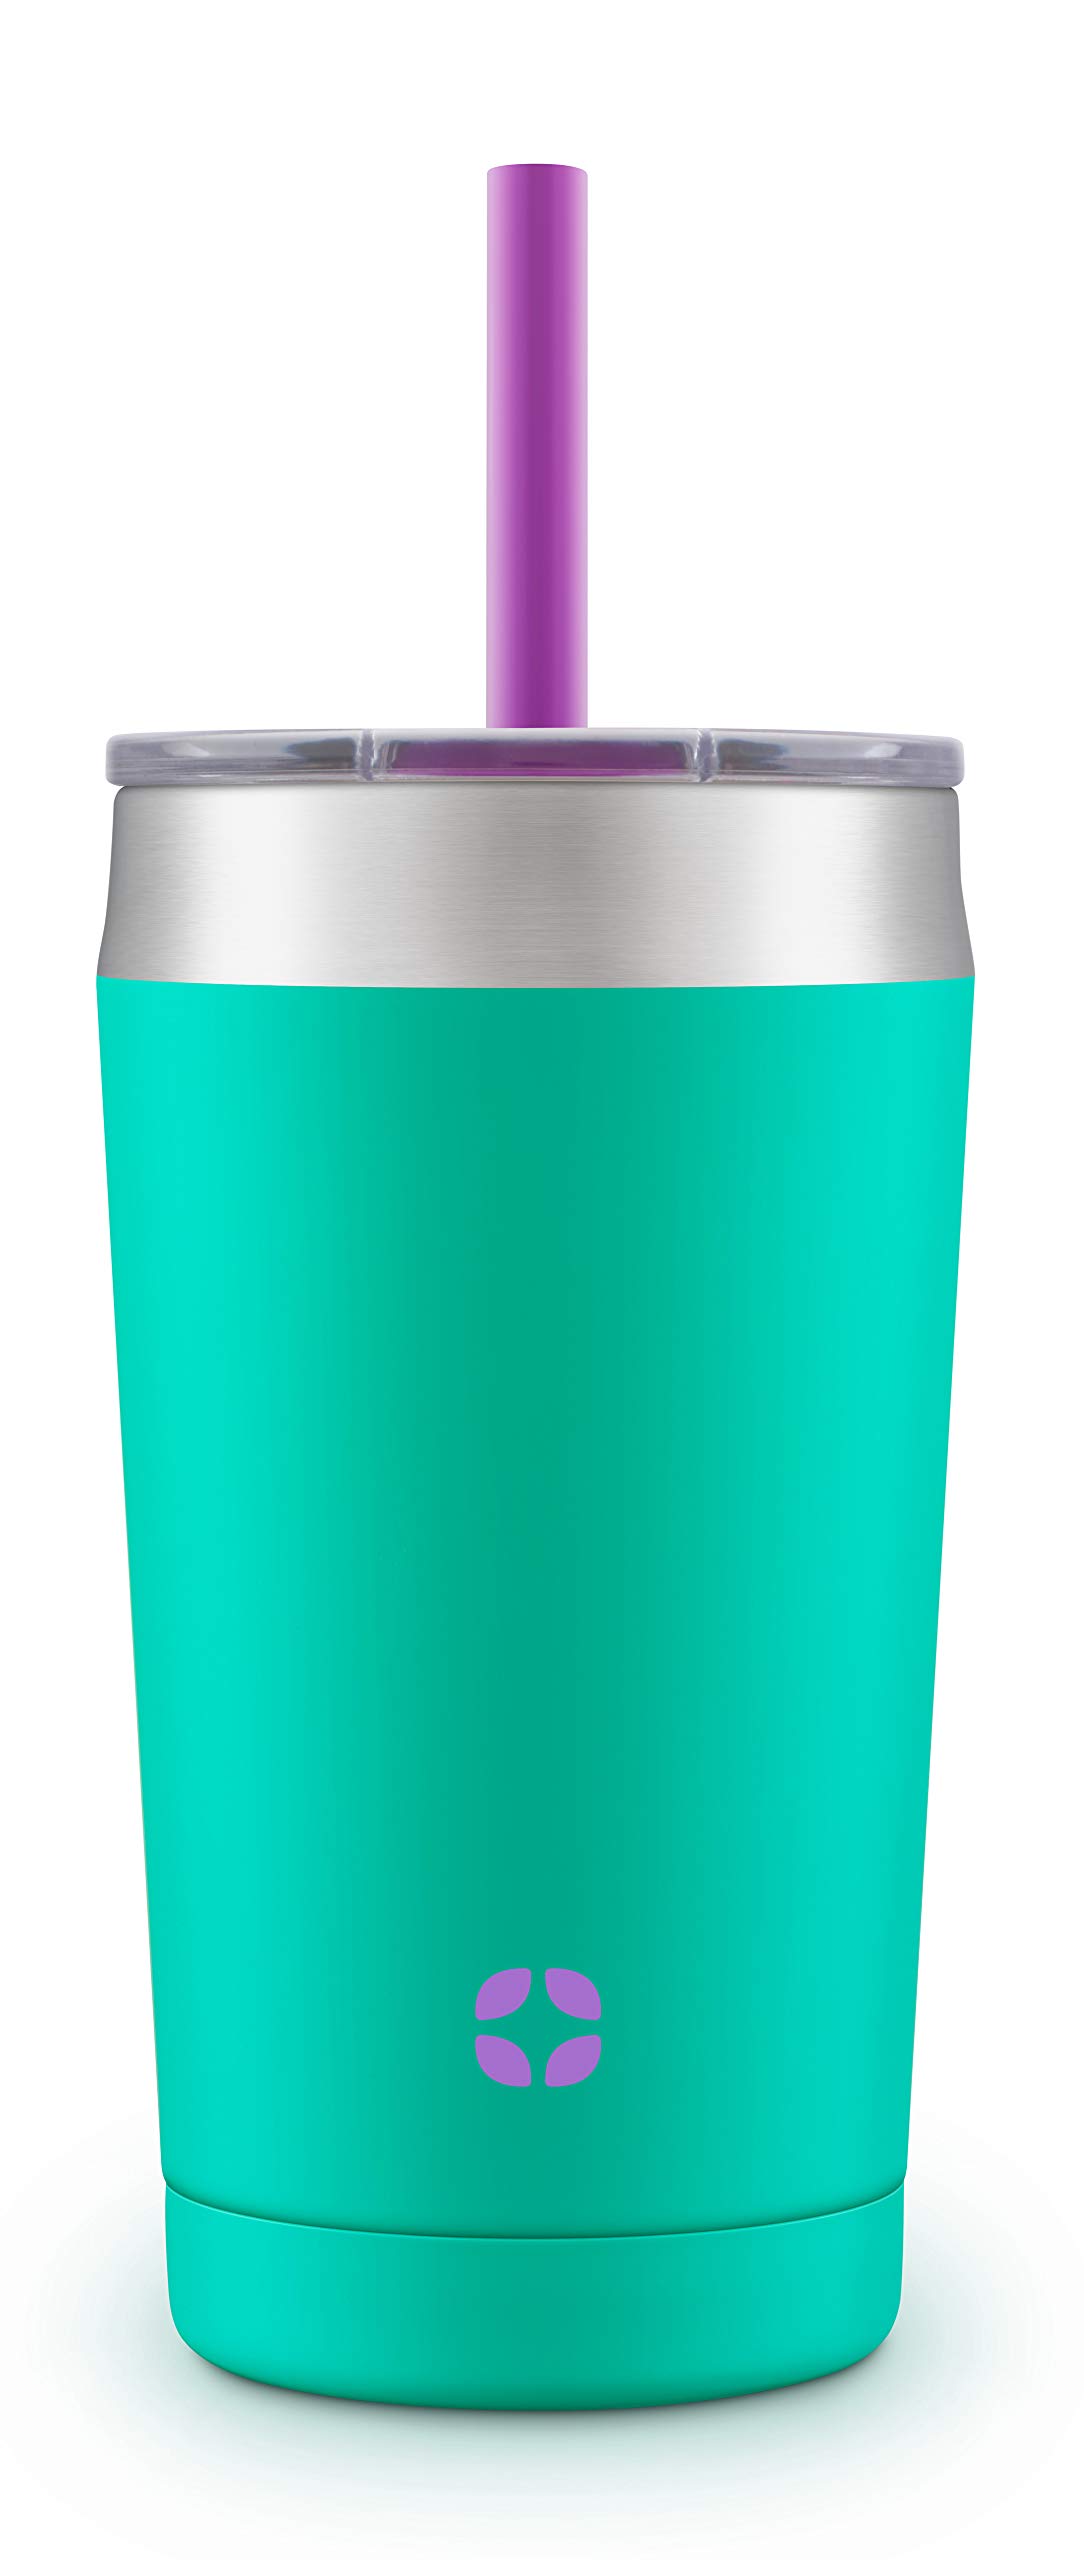 Ello Rise Vacuum Insulated Stainless Steel Tumbler with Optional Straw, 12 oz, Mint